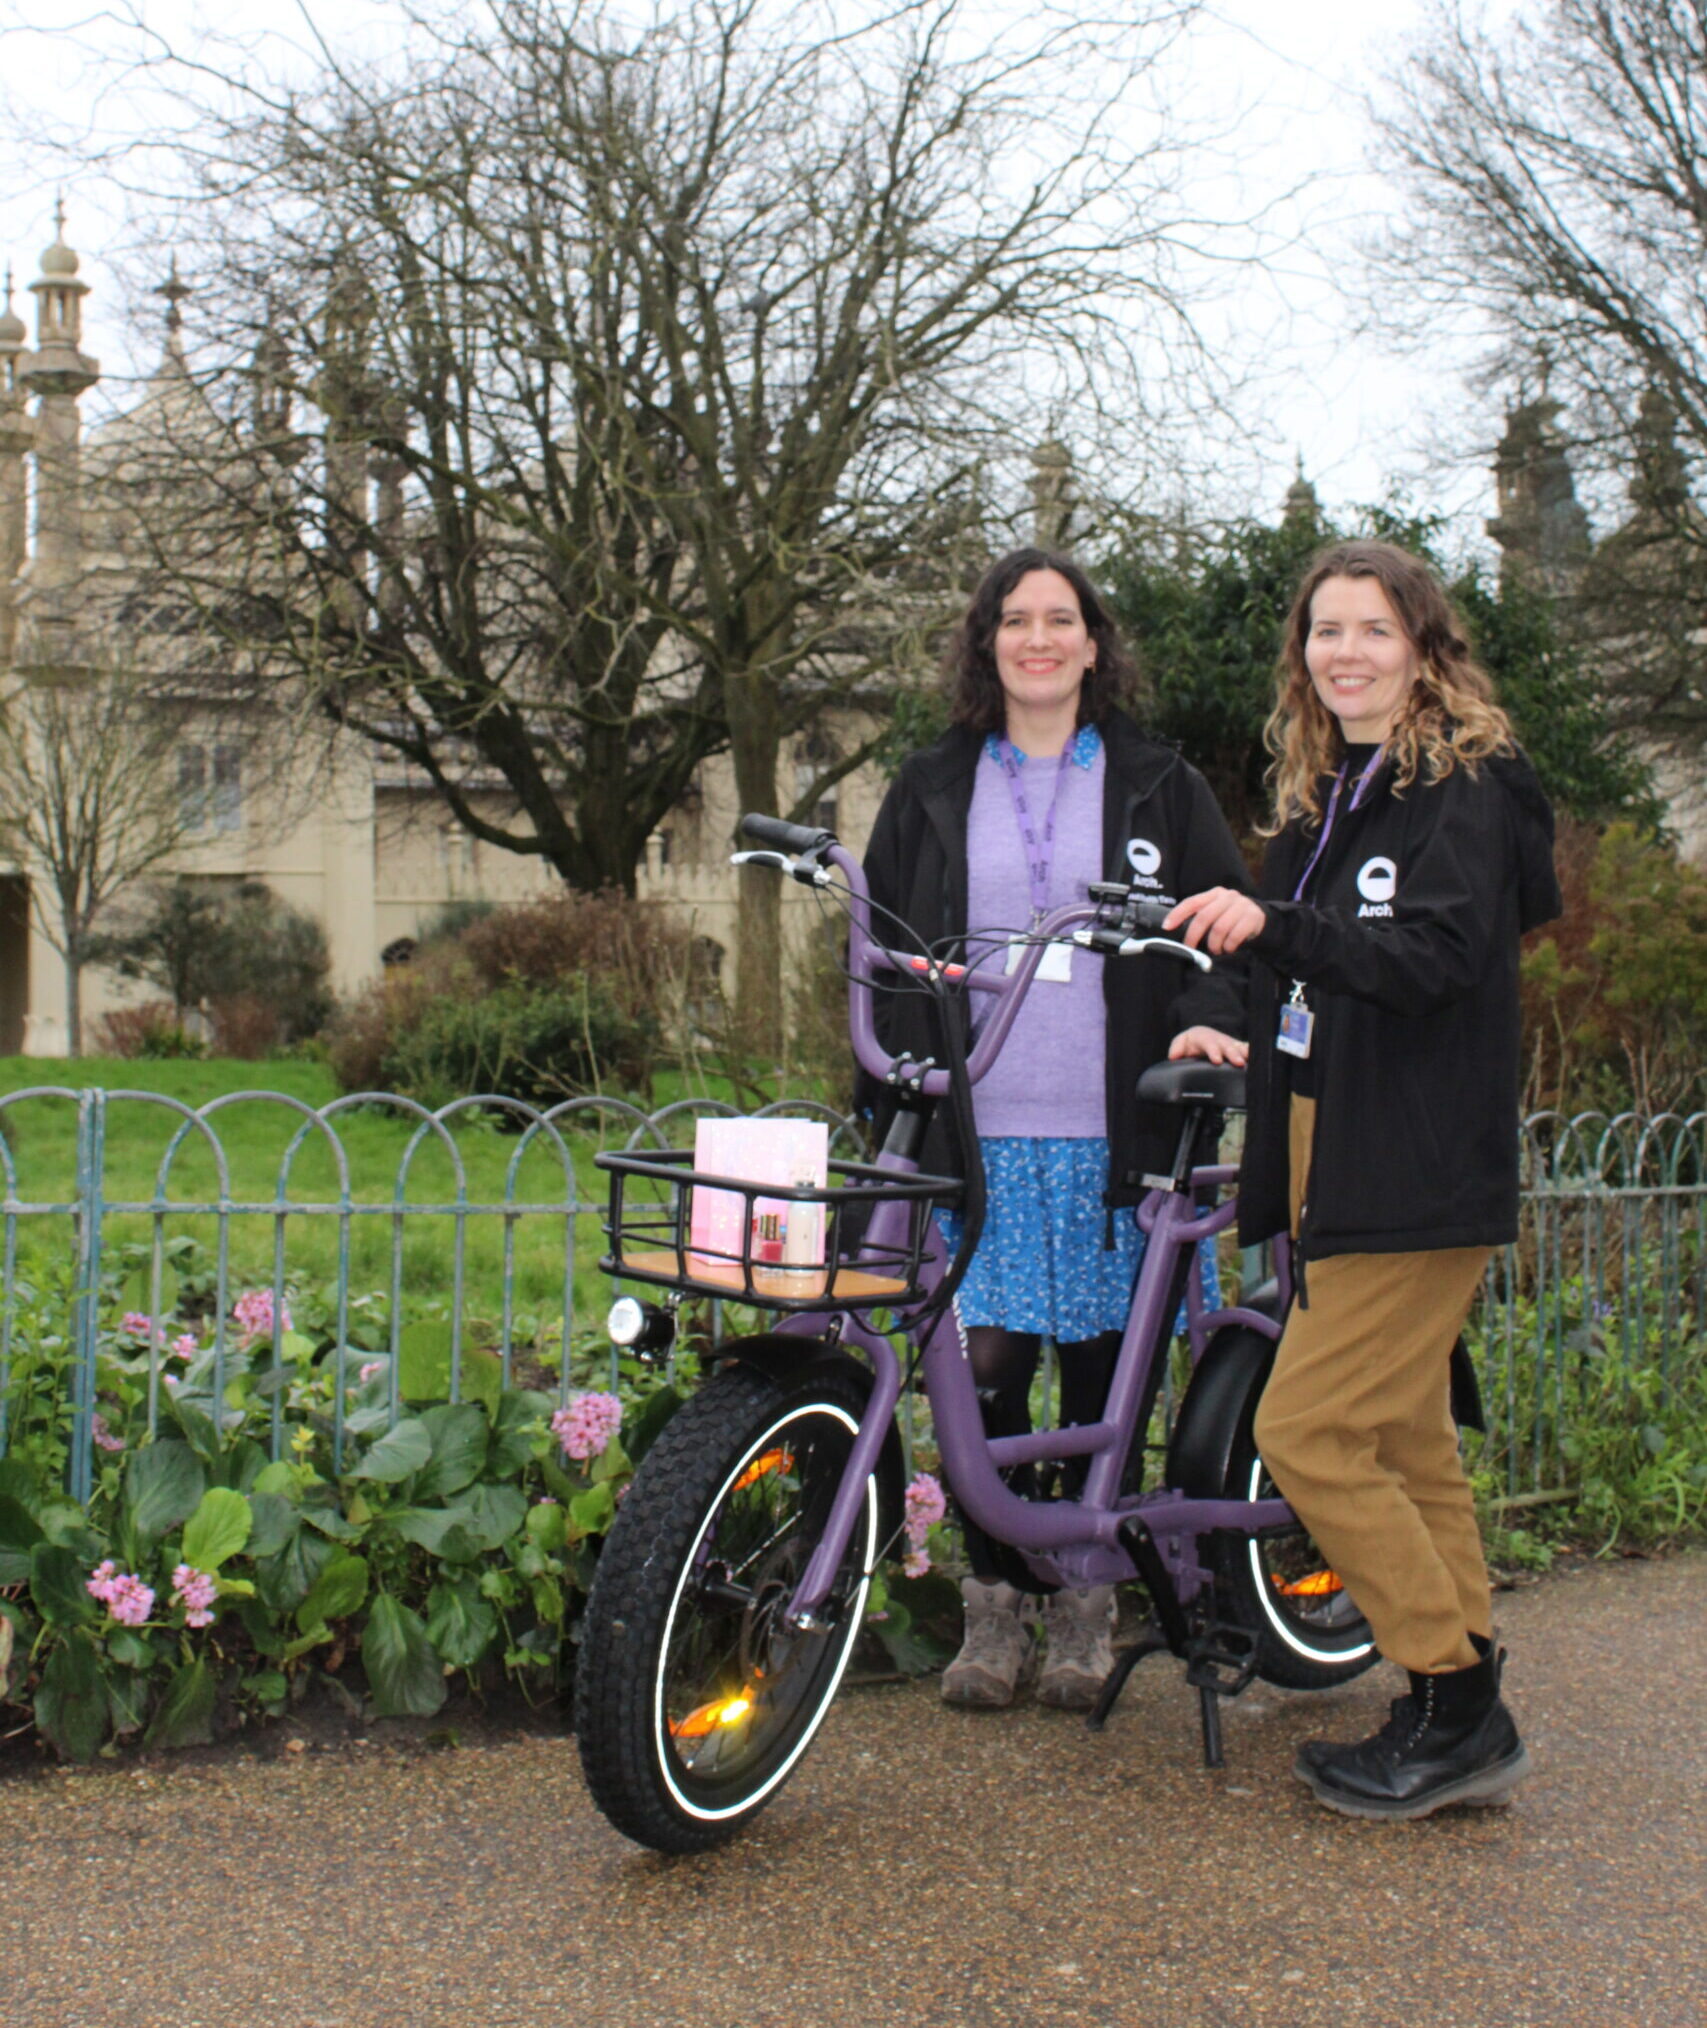 Two women standing in a park next to a bike, smiling at the camera